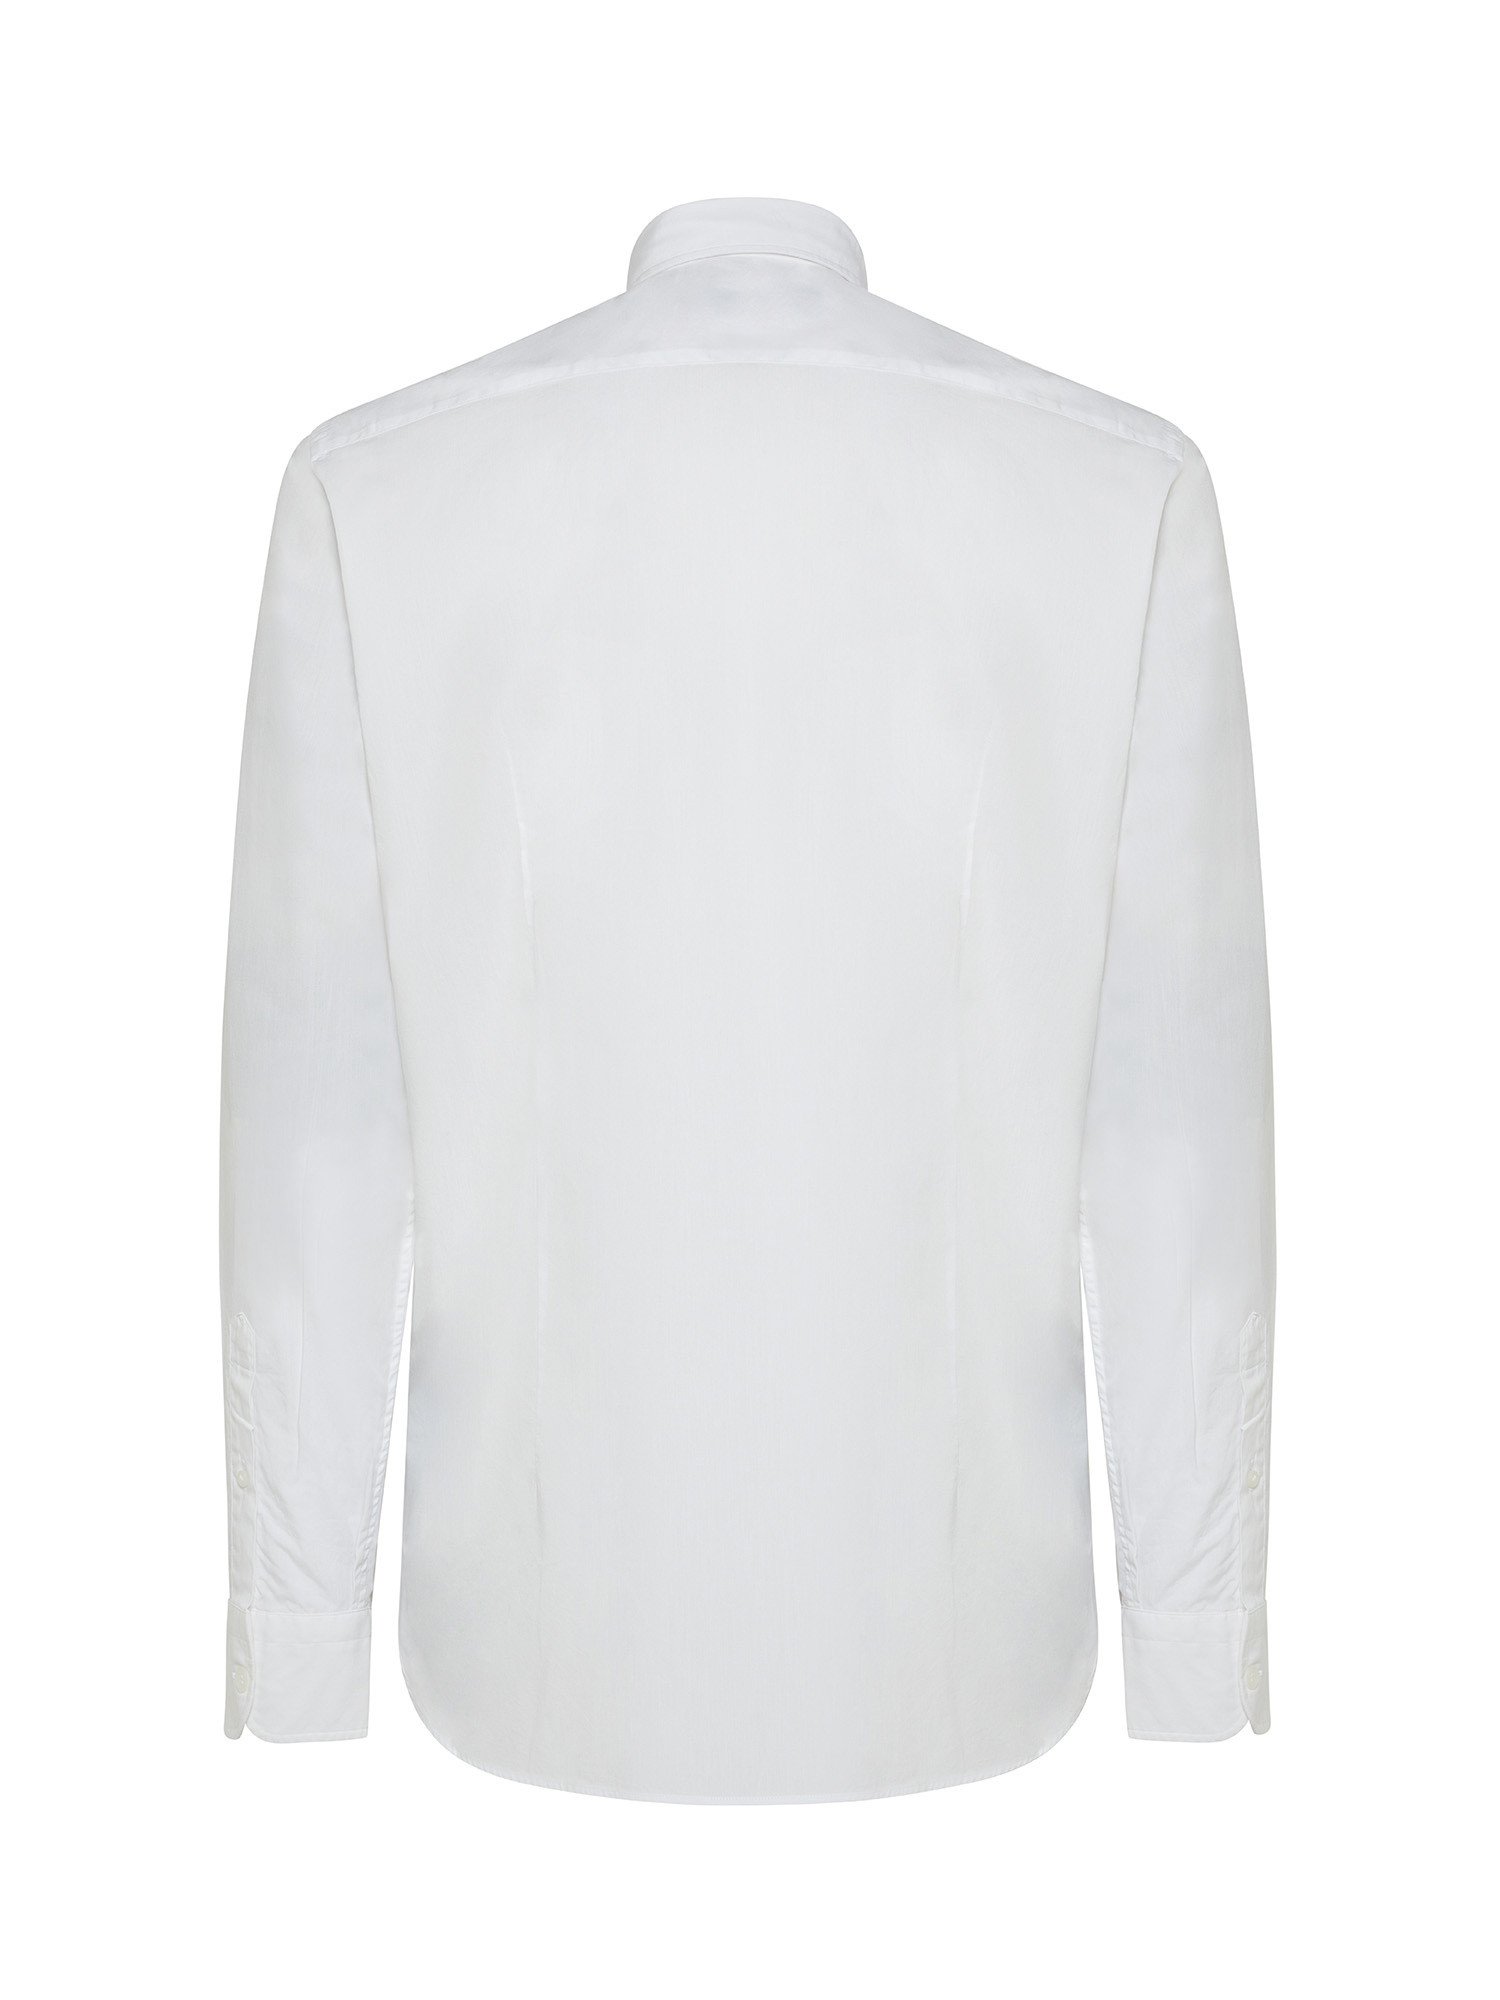 Luca D'Altieri - Slim fit shirt in pure cotton, White, large image number 1